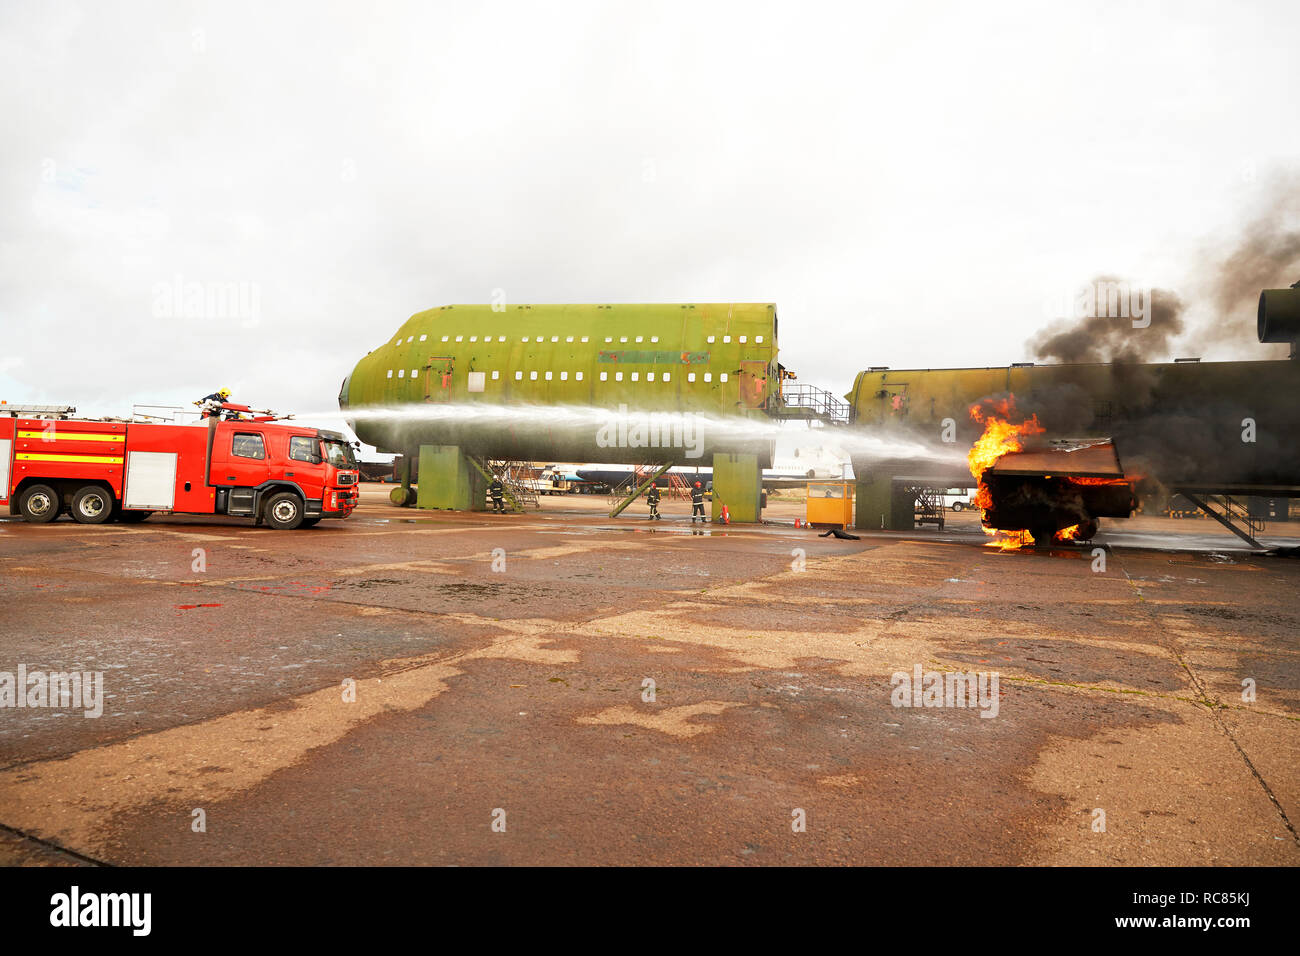 Firemen training, spraying water from fire engine at mock airplane Stock Photo